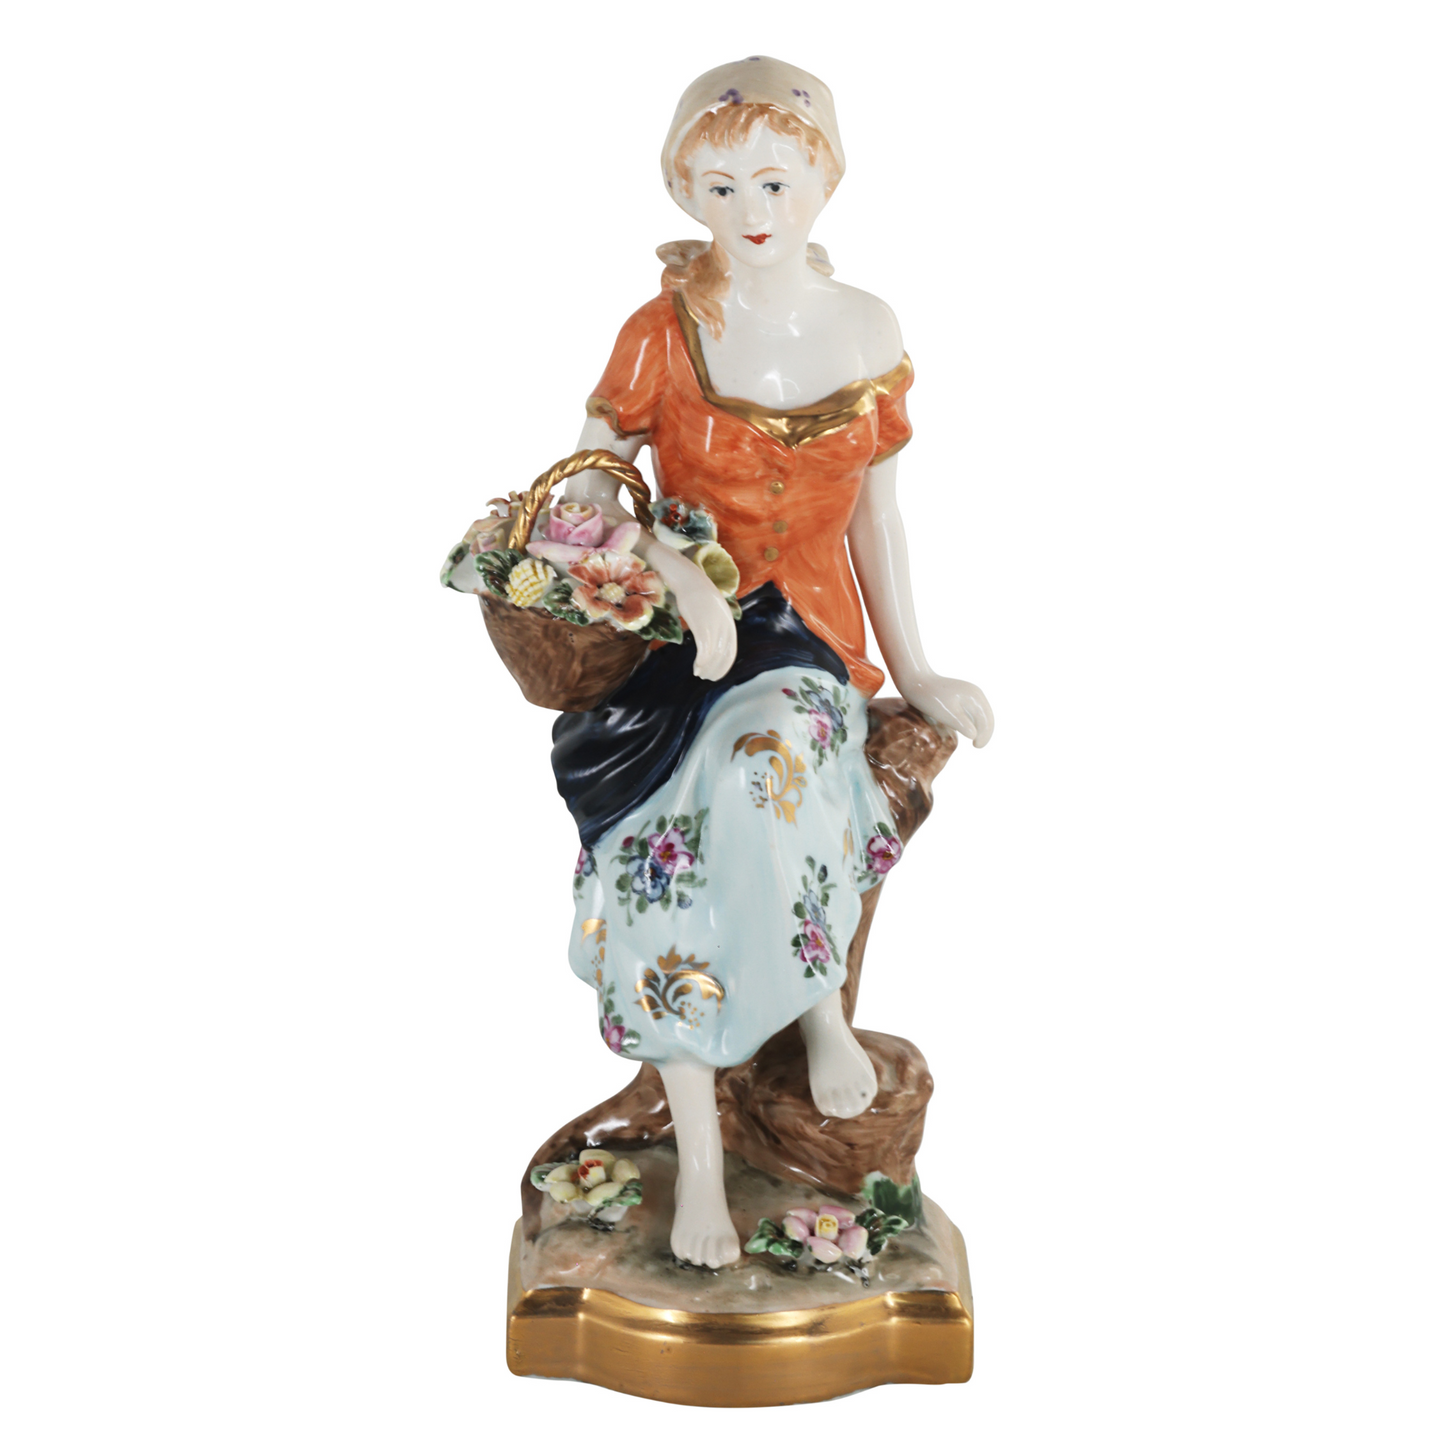 Woman Picking Flowers Hand-painted Porcelain Figurine